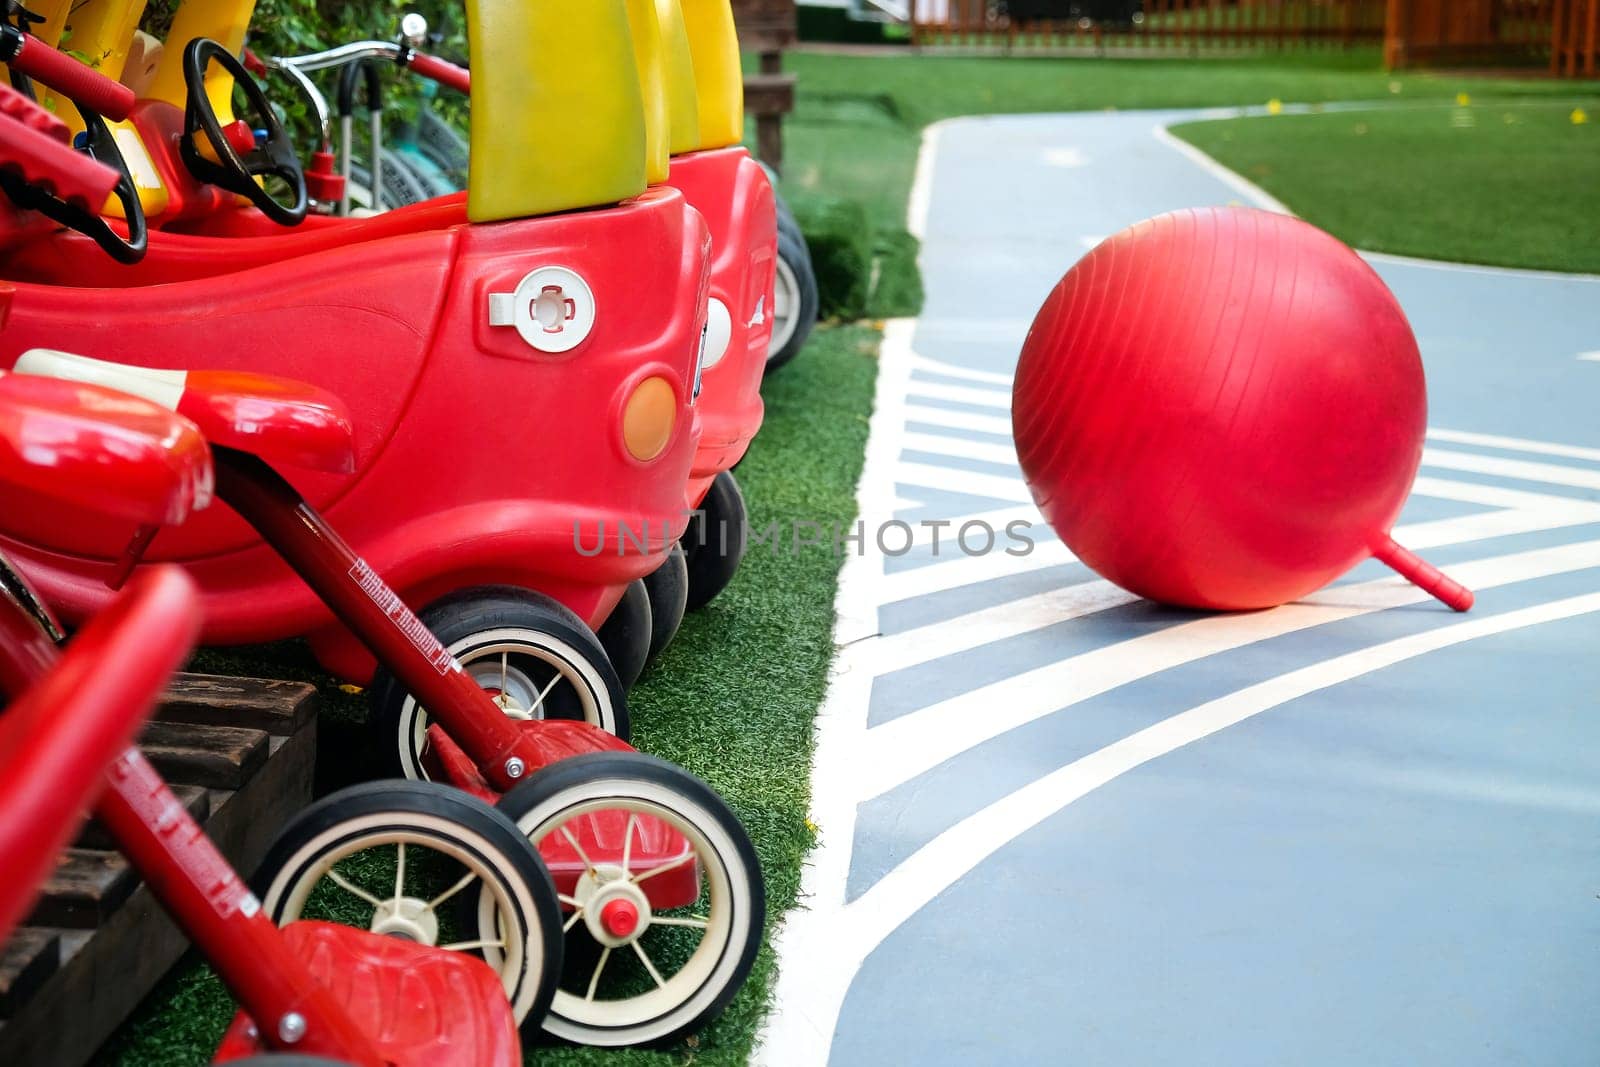 Colorful playground equipment with red toy cars and a ball on artificial turf